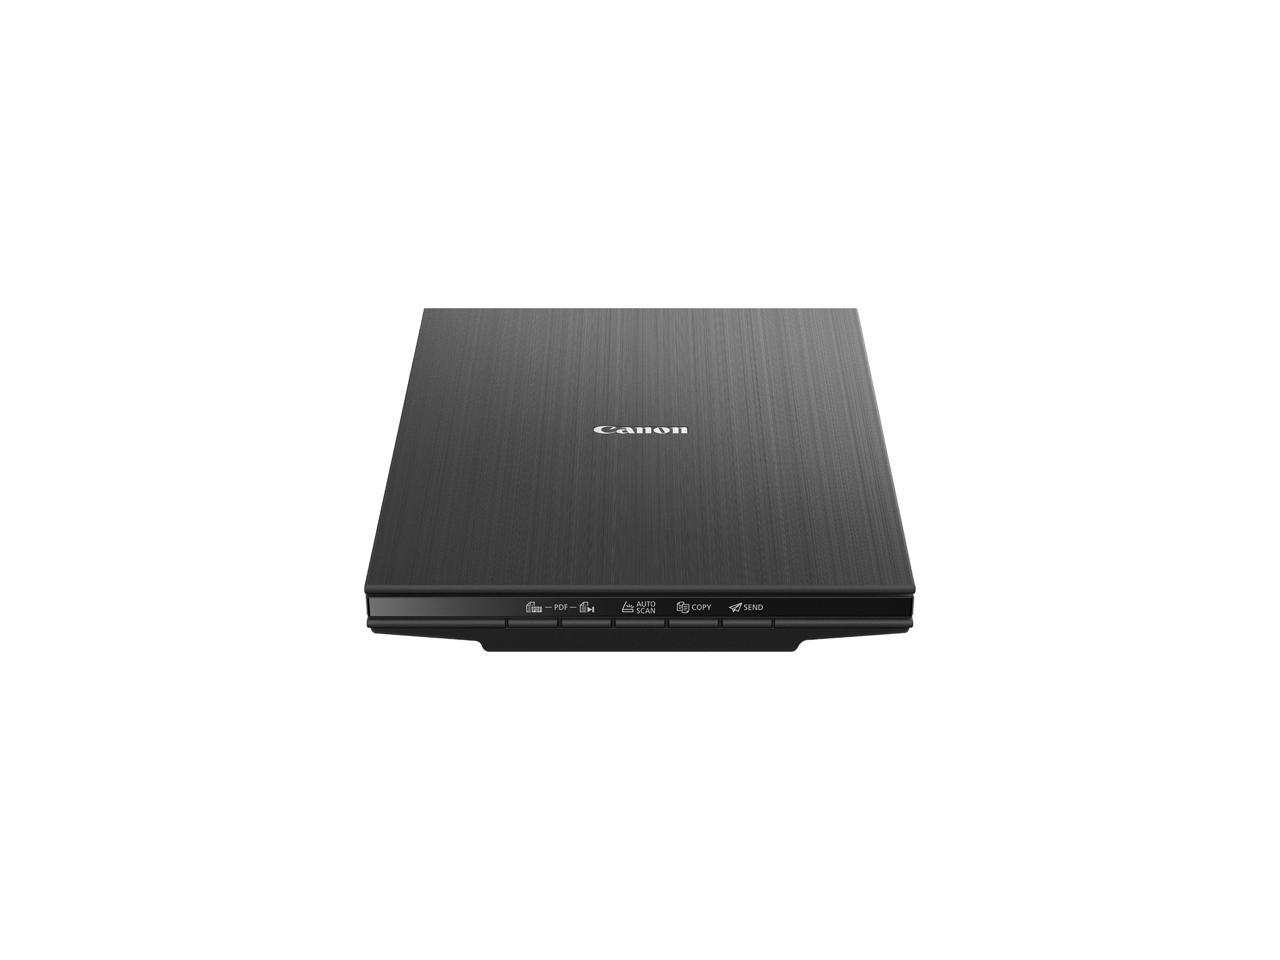 Canon CanoScan LiDE 400 (2996C002) 4800 x 4800dpi Color: 48-bit Internal / 48-bit or 24-bit External USB Type-C (One Cable For Data & Power) Interface Flatbed Scanner